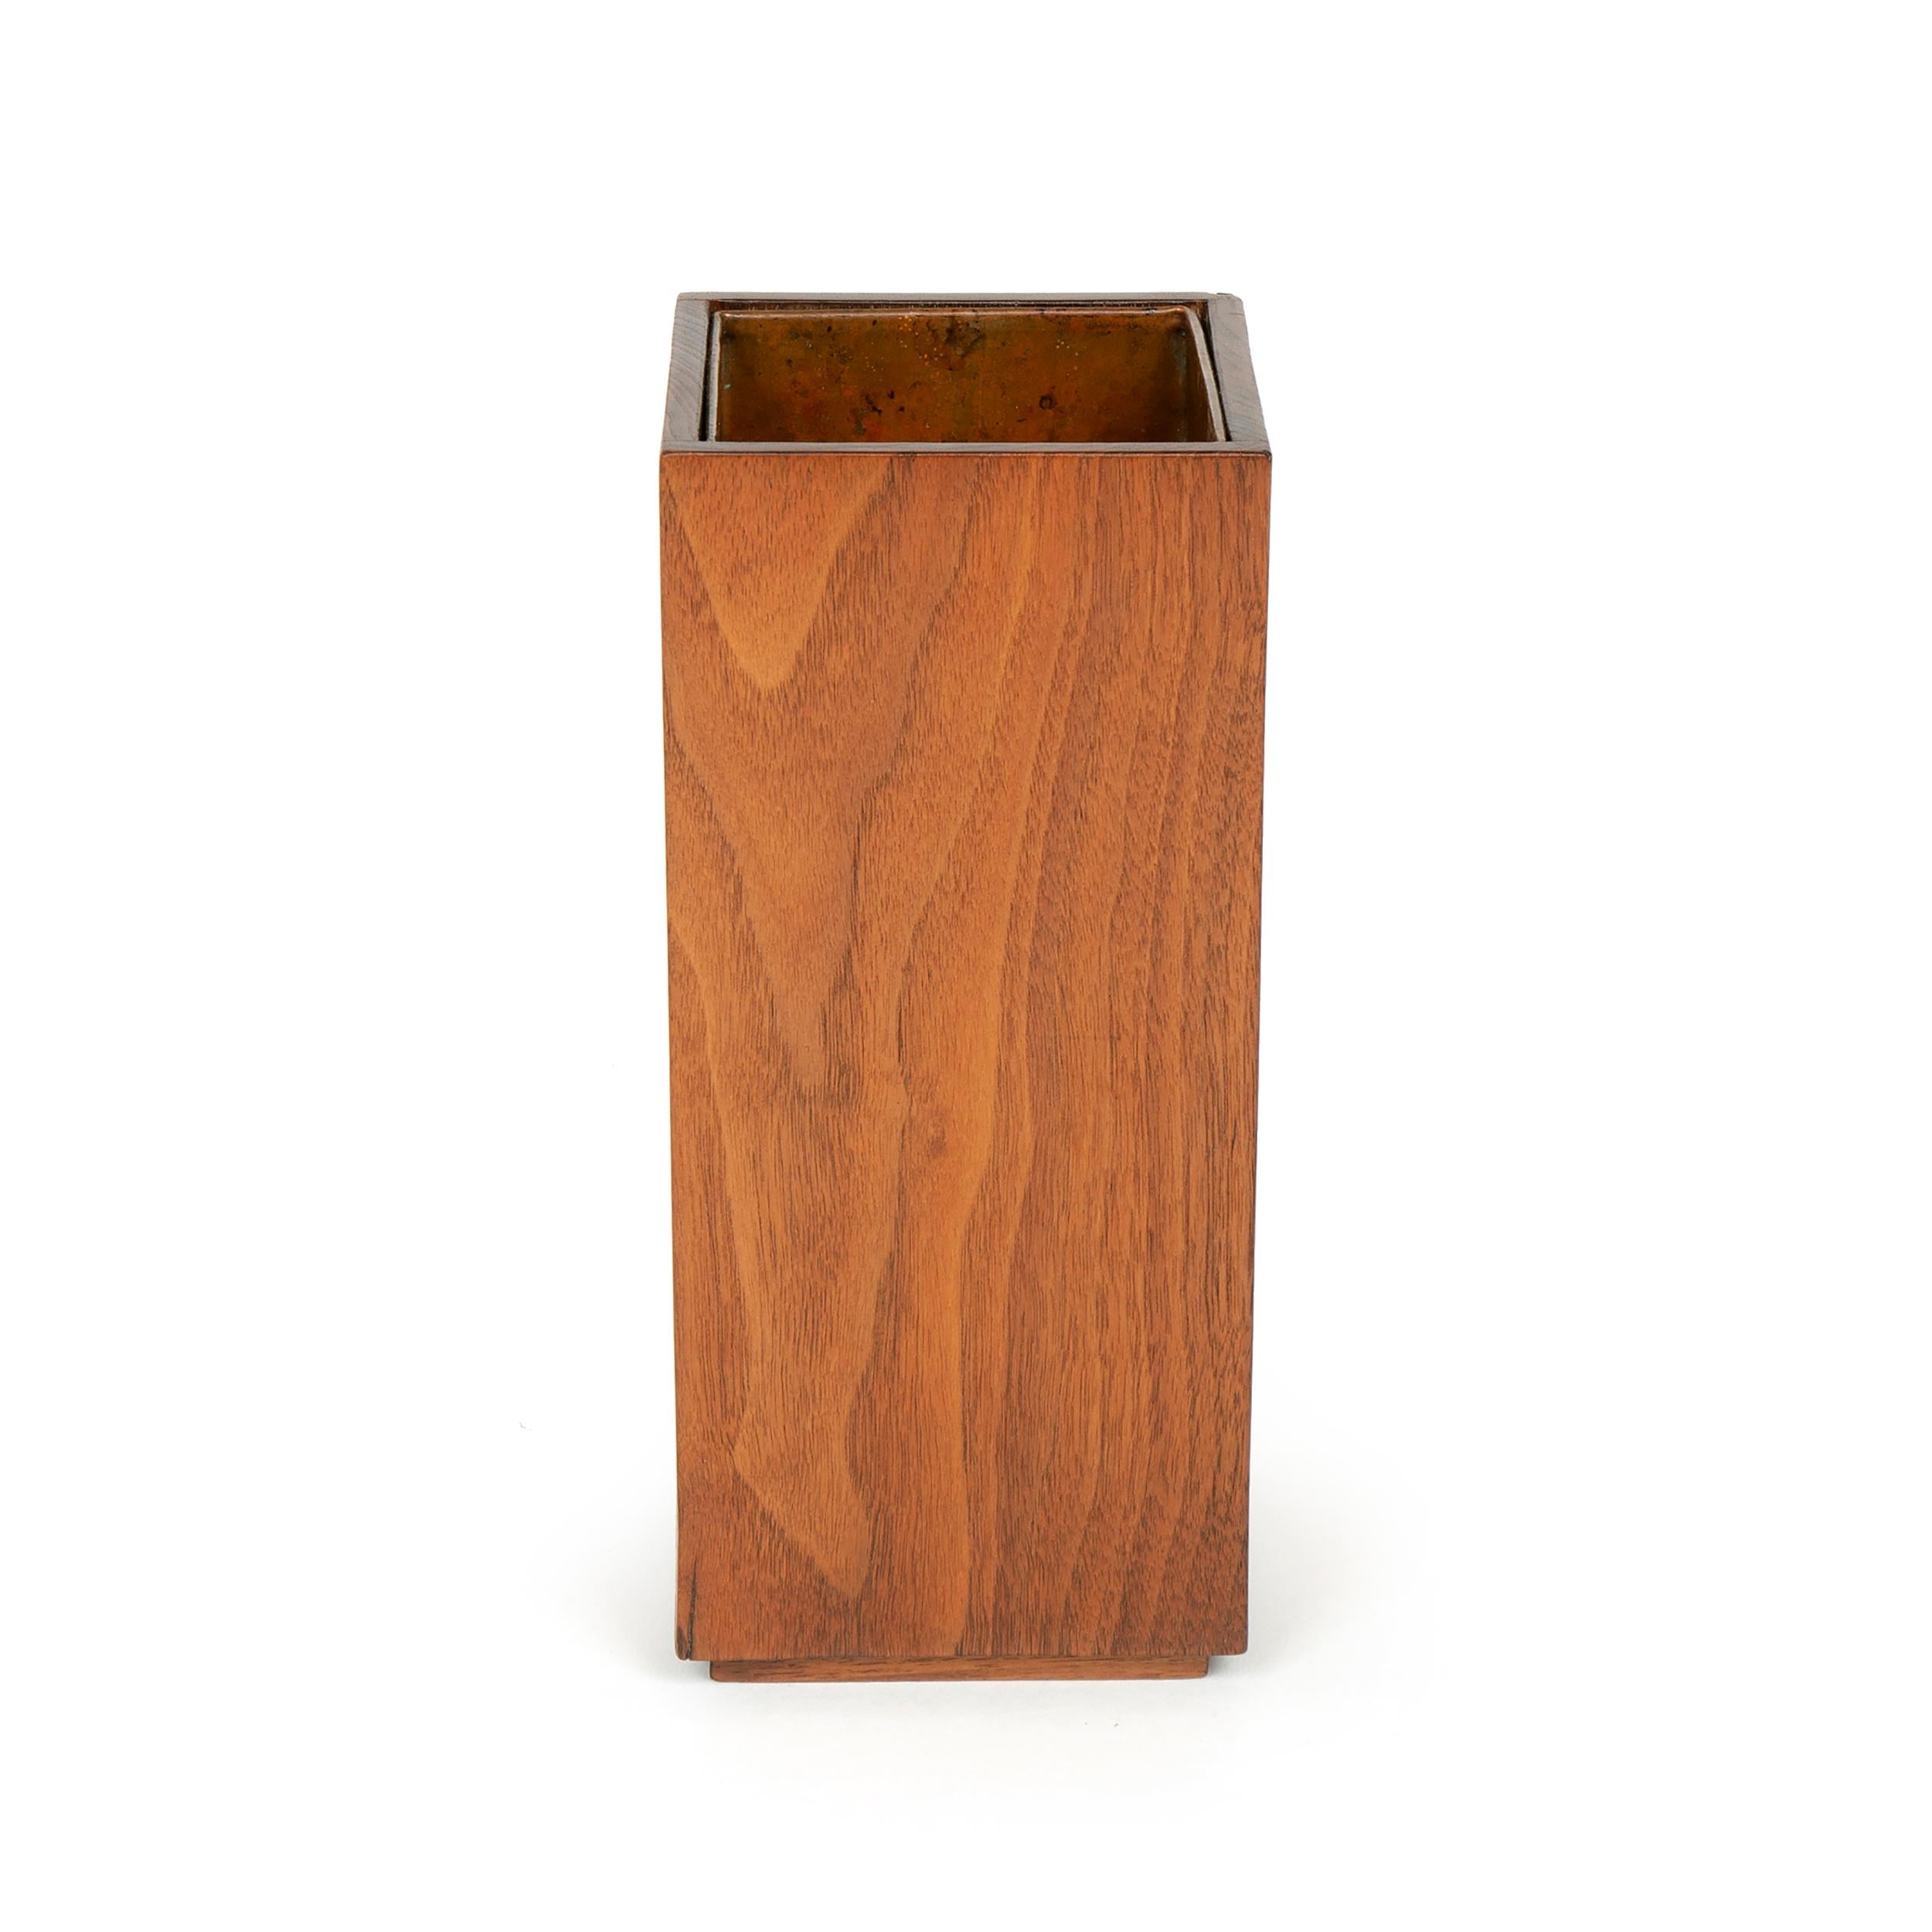 A copper lined rectilinear walnut planter / vase, on a small plinth base.